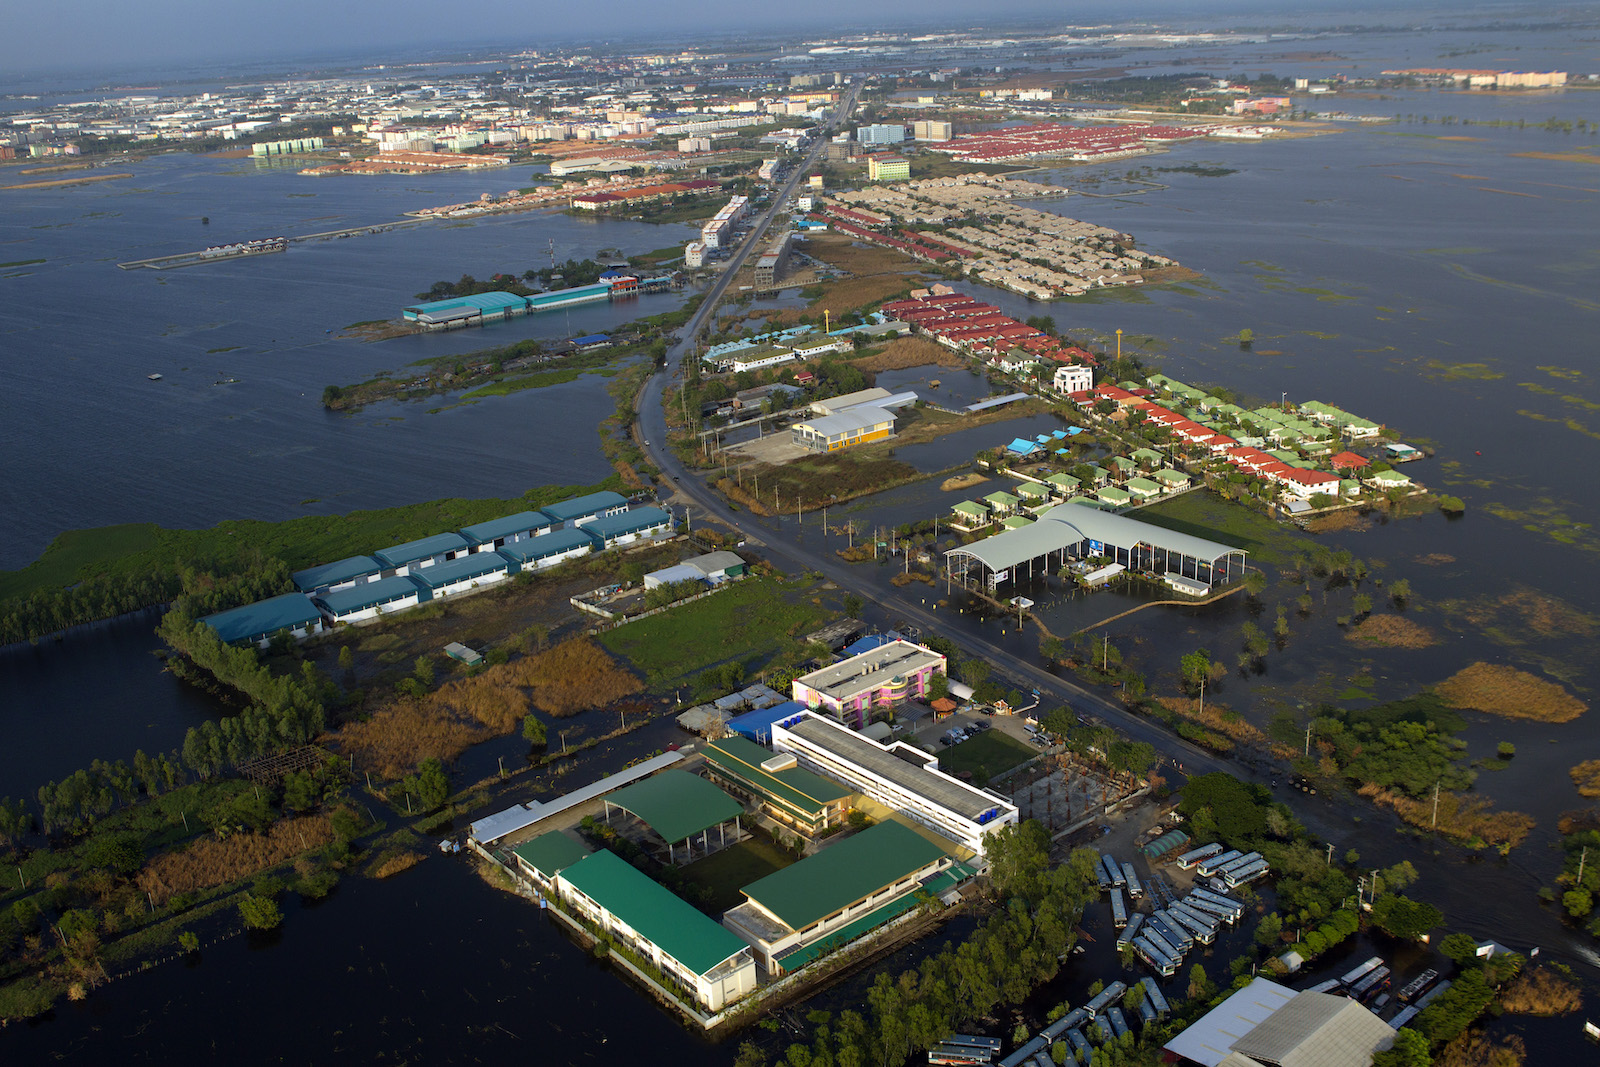 Flooded factories in the Rojuna industrial district in Ayutthaya, Thailand, November 2011